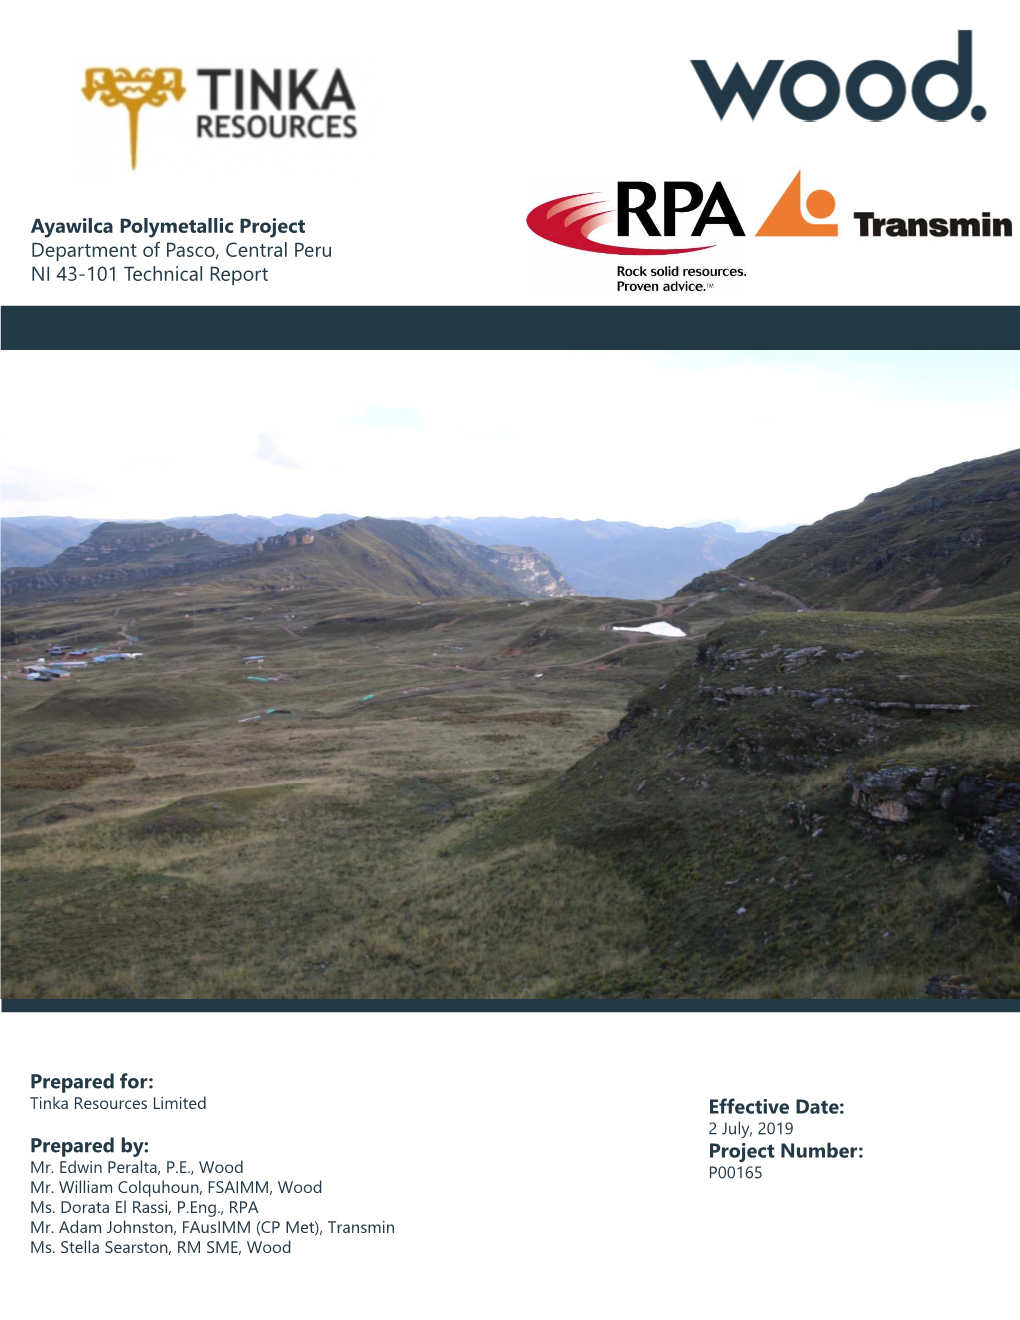 Ayawilca Polymetallic Project Department of Pasco, Central Peru NI 43-101 Technical Report